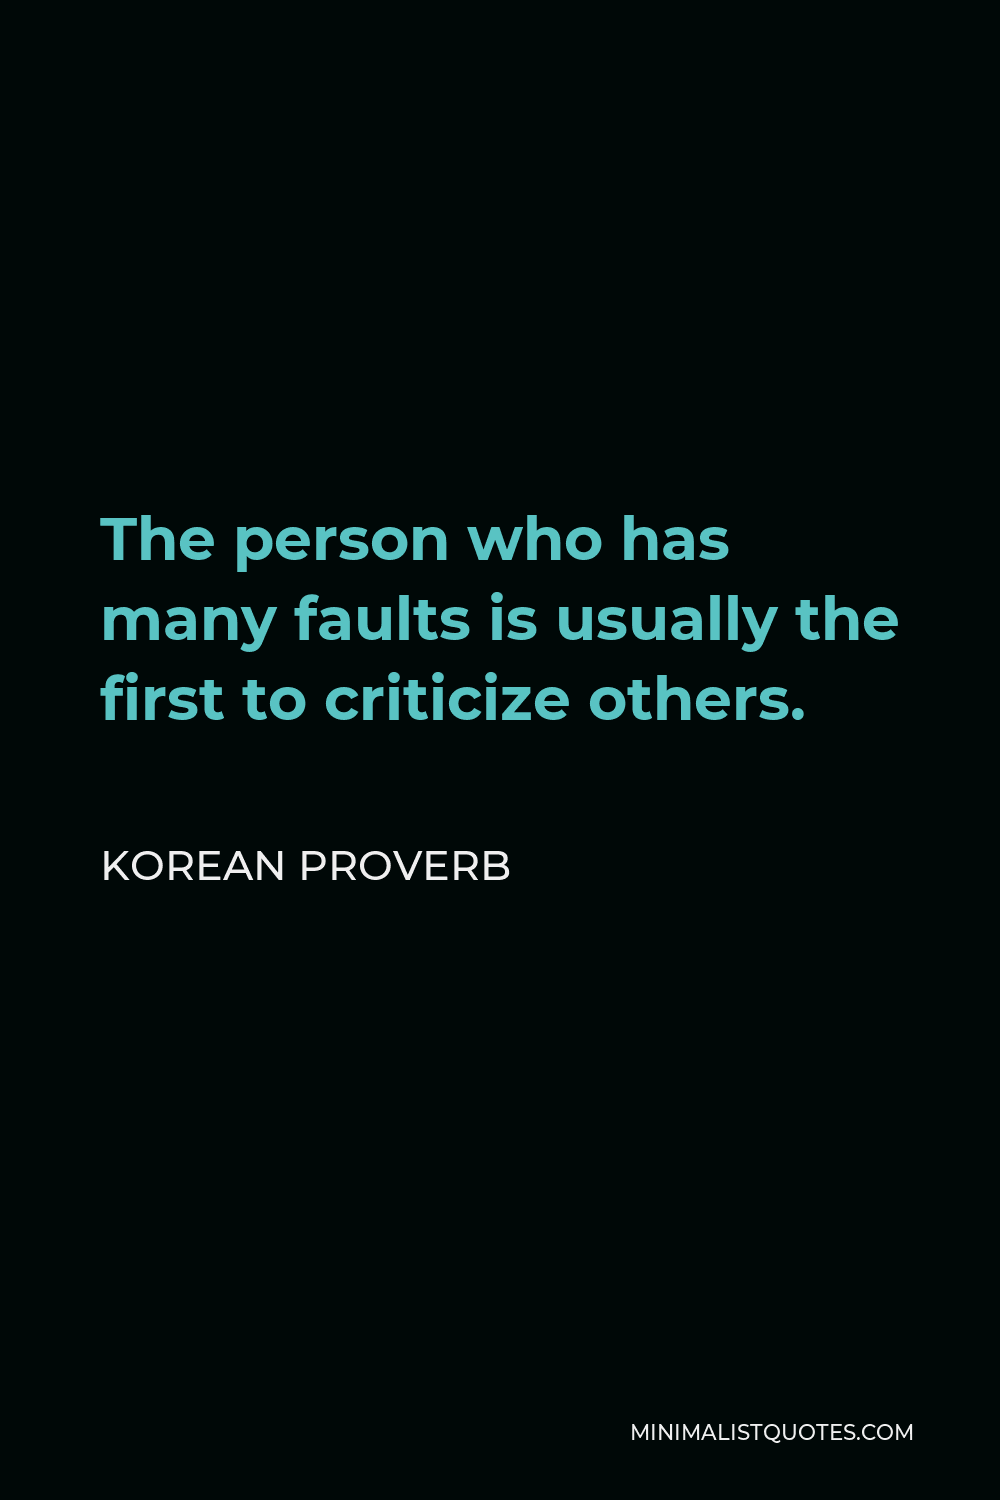 Korean Proverb Quote - The person who has many faults is usually the first to criticize others.